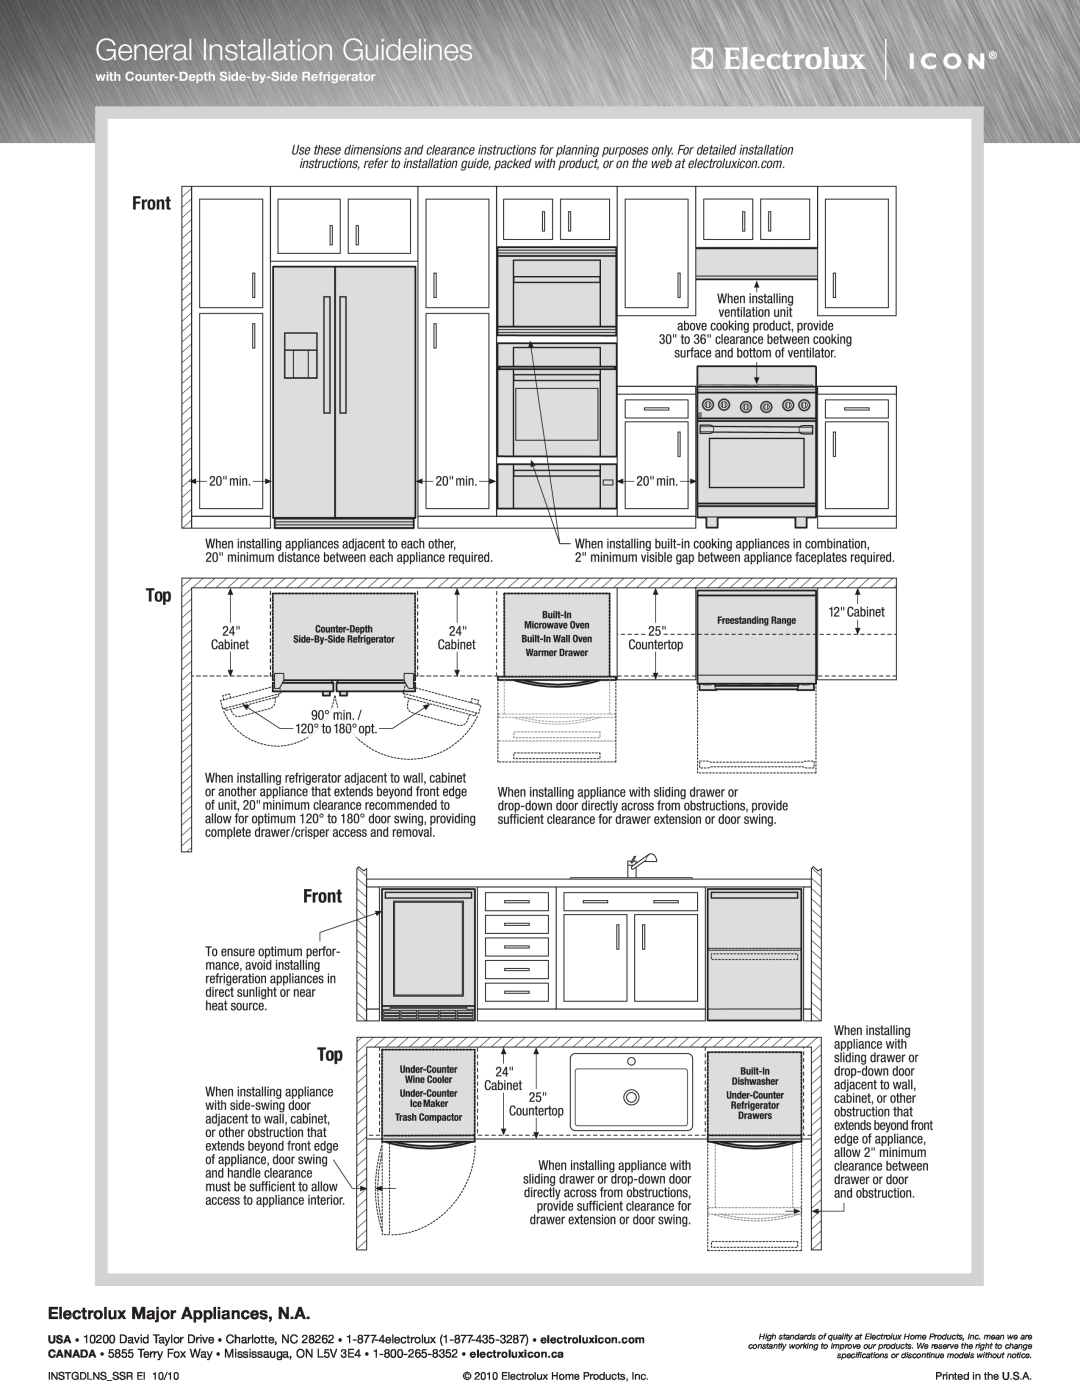 Electrolux E36GF76JPS specifications with Counter-Depth Side-by-Side Refrigerator, General Installation Guidelines, Front 